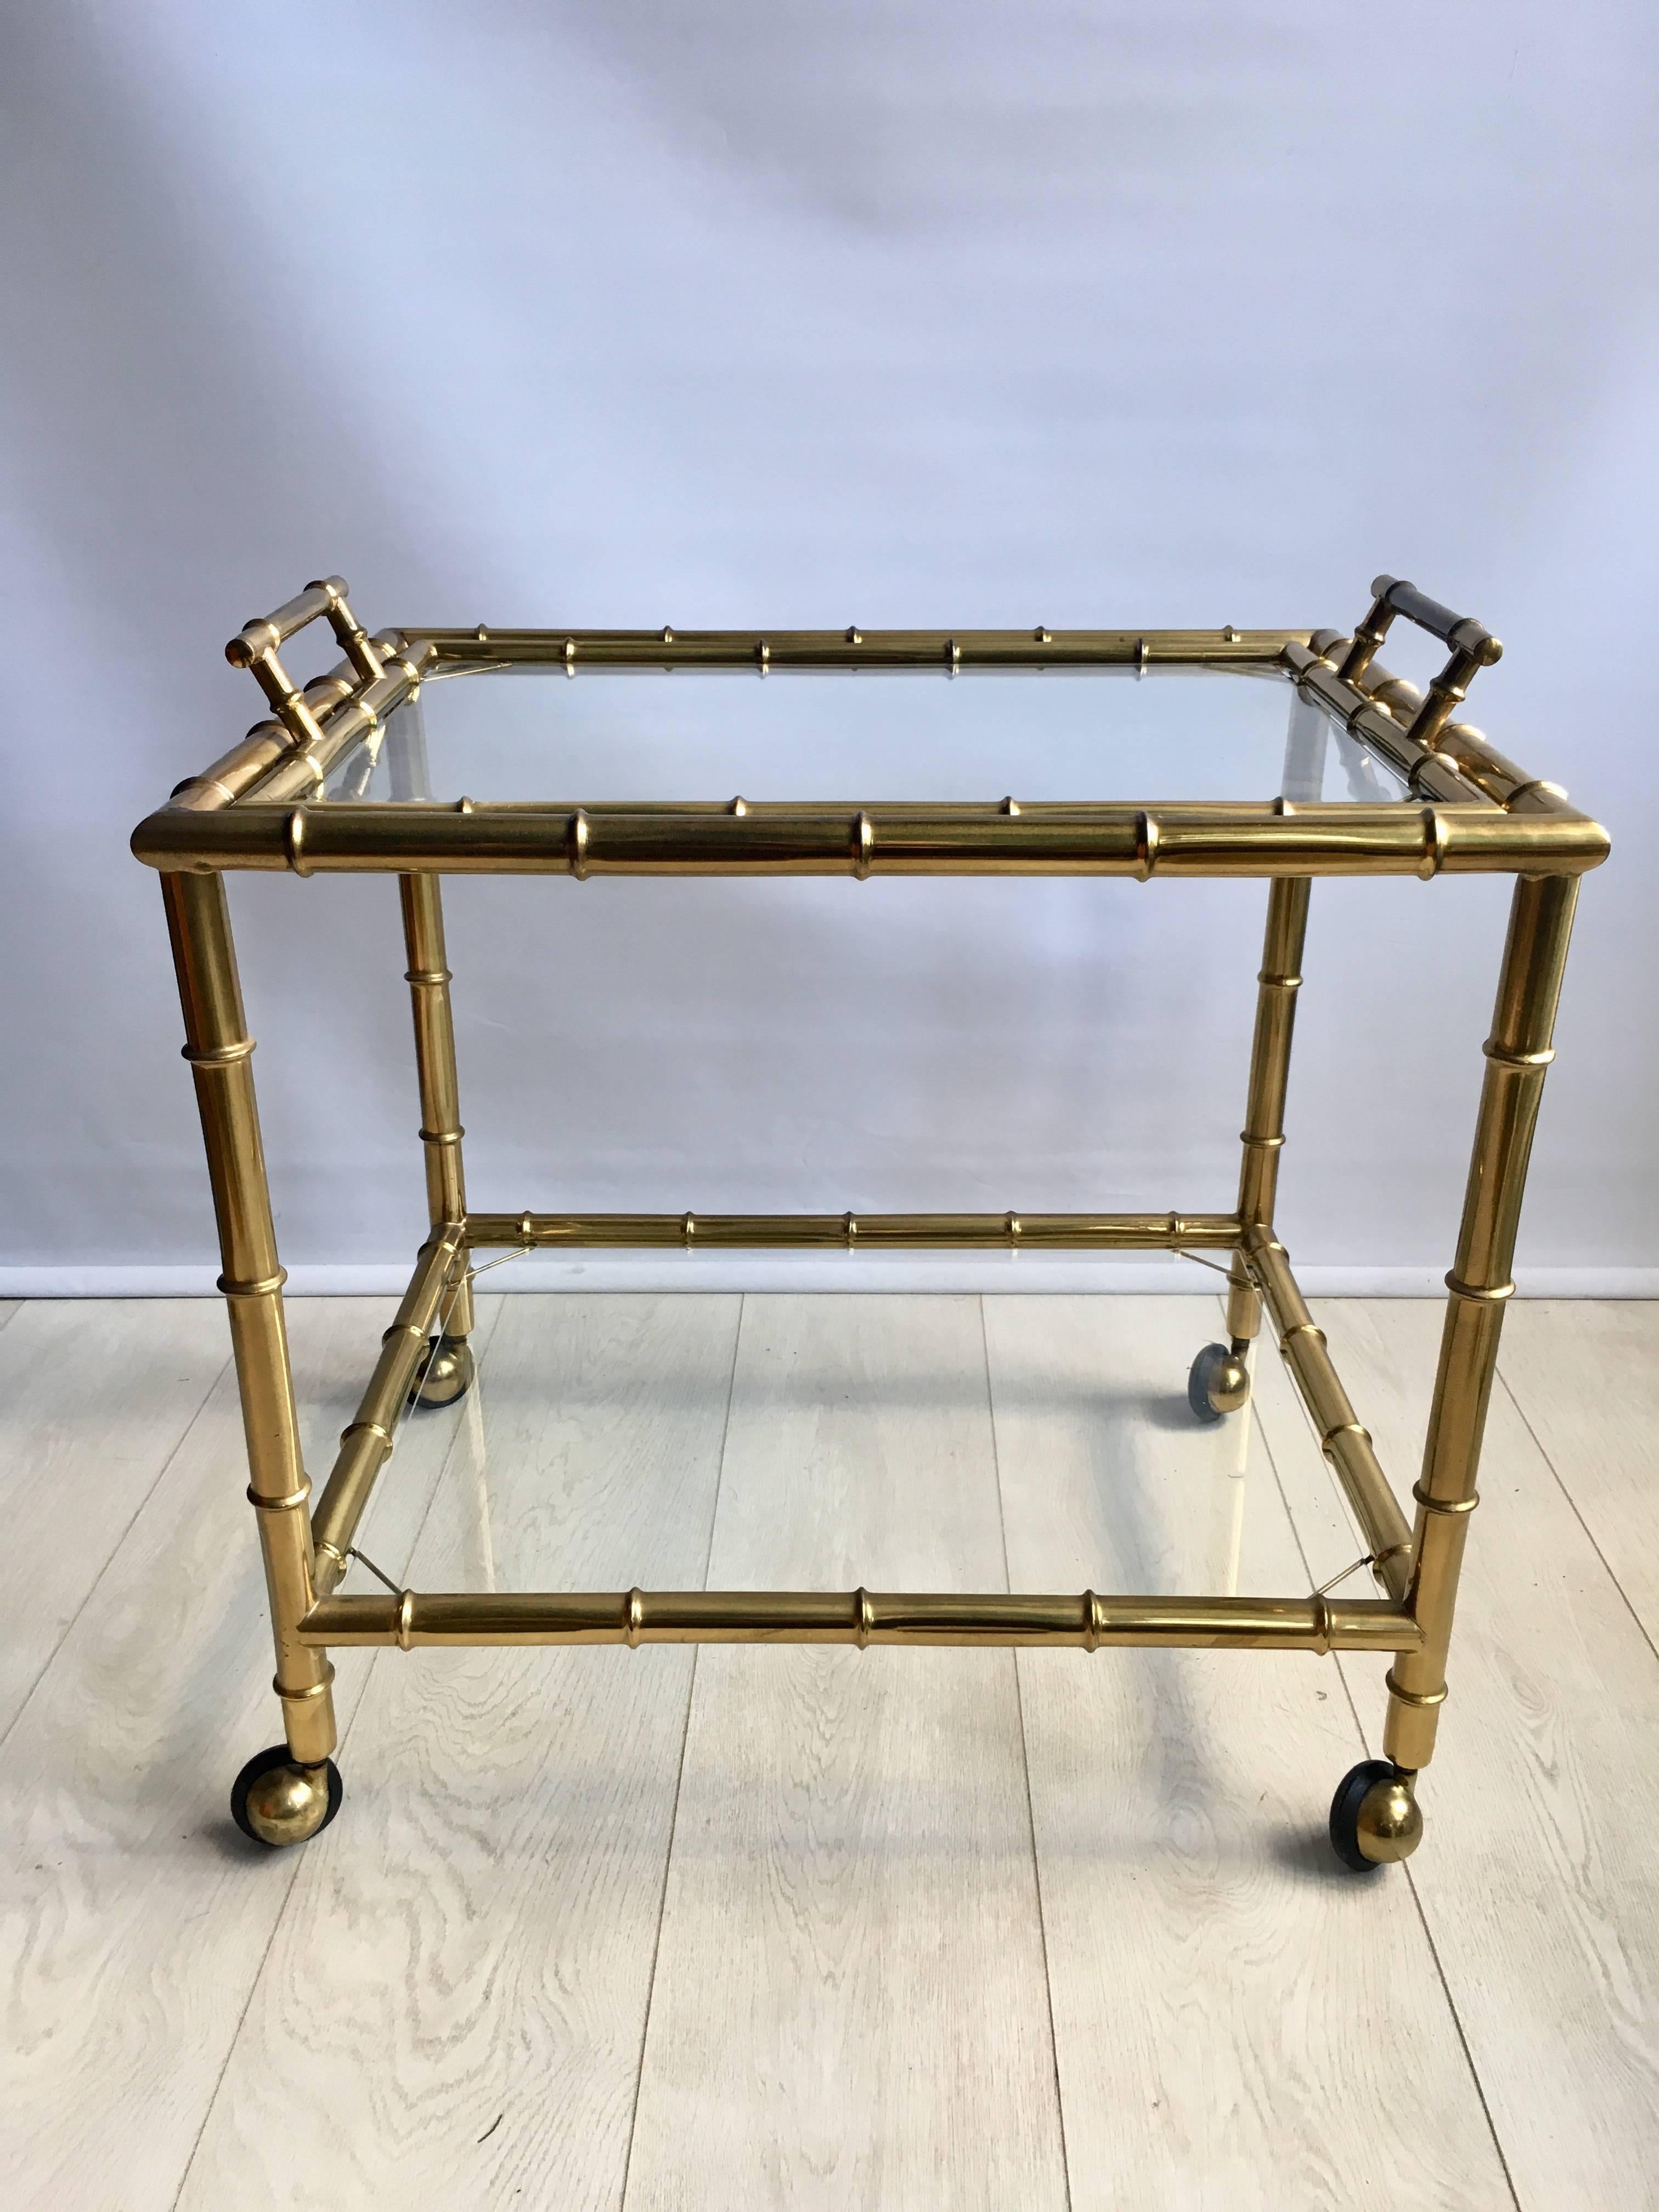 Chunky faux bamboo frame with lift off tray

Aged brass with lovely warm patina

Measures 60cm wide, 45cm deep and stands 61.5cm tall to handles (55cm to glass).